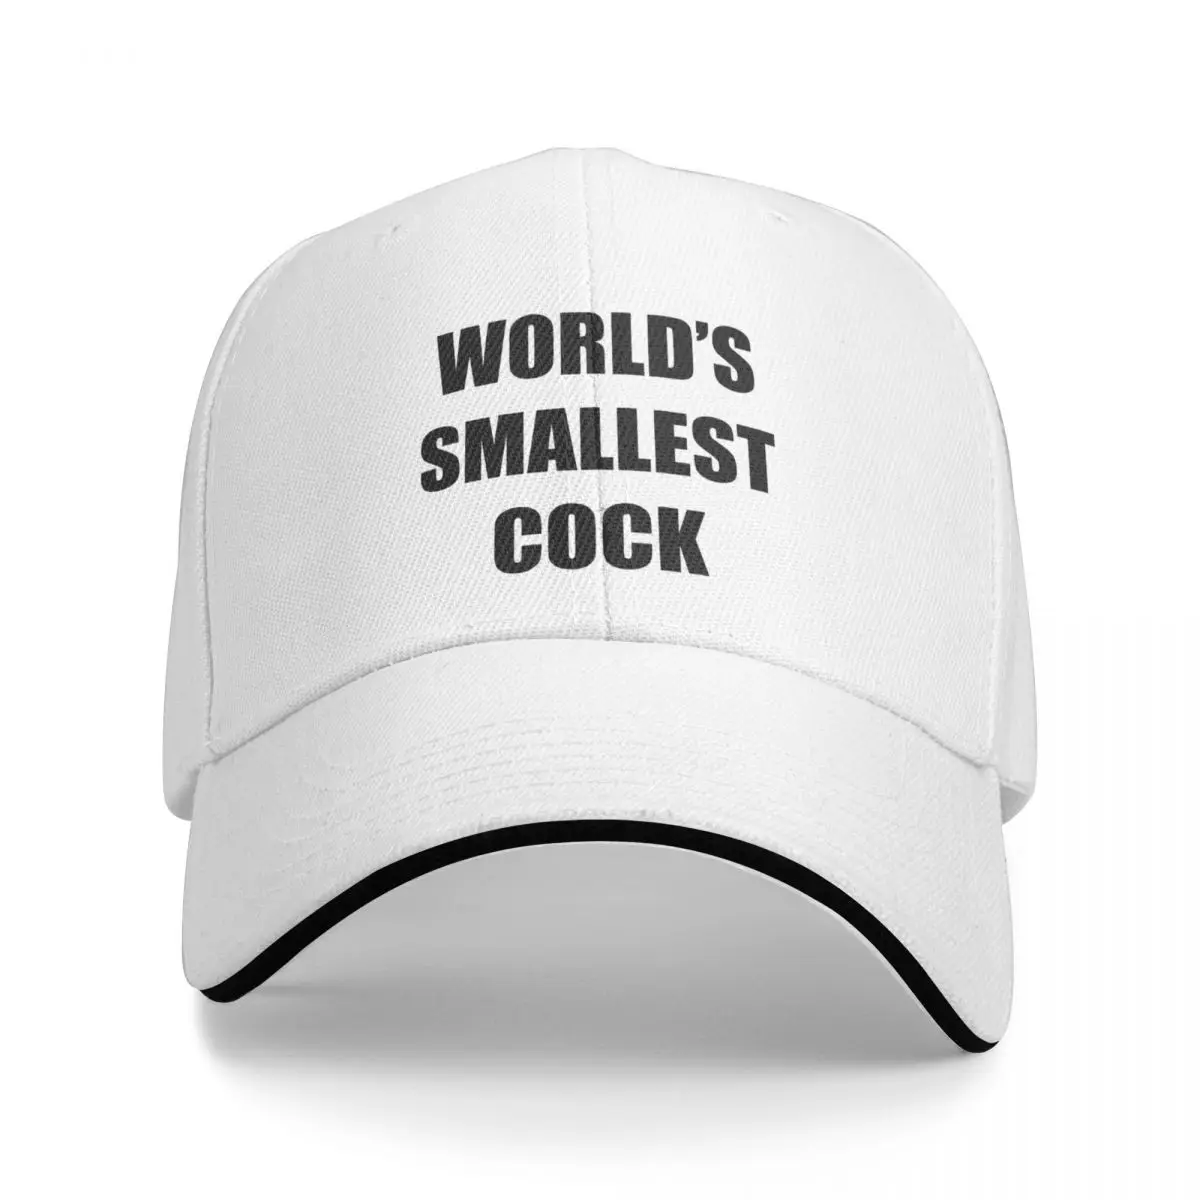 

Worlds Smallest Cock Gifts - Funny Gag Gift Ideas for Bachelor Party from The Night Before - Great Best Friend Pres Baseball Cap